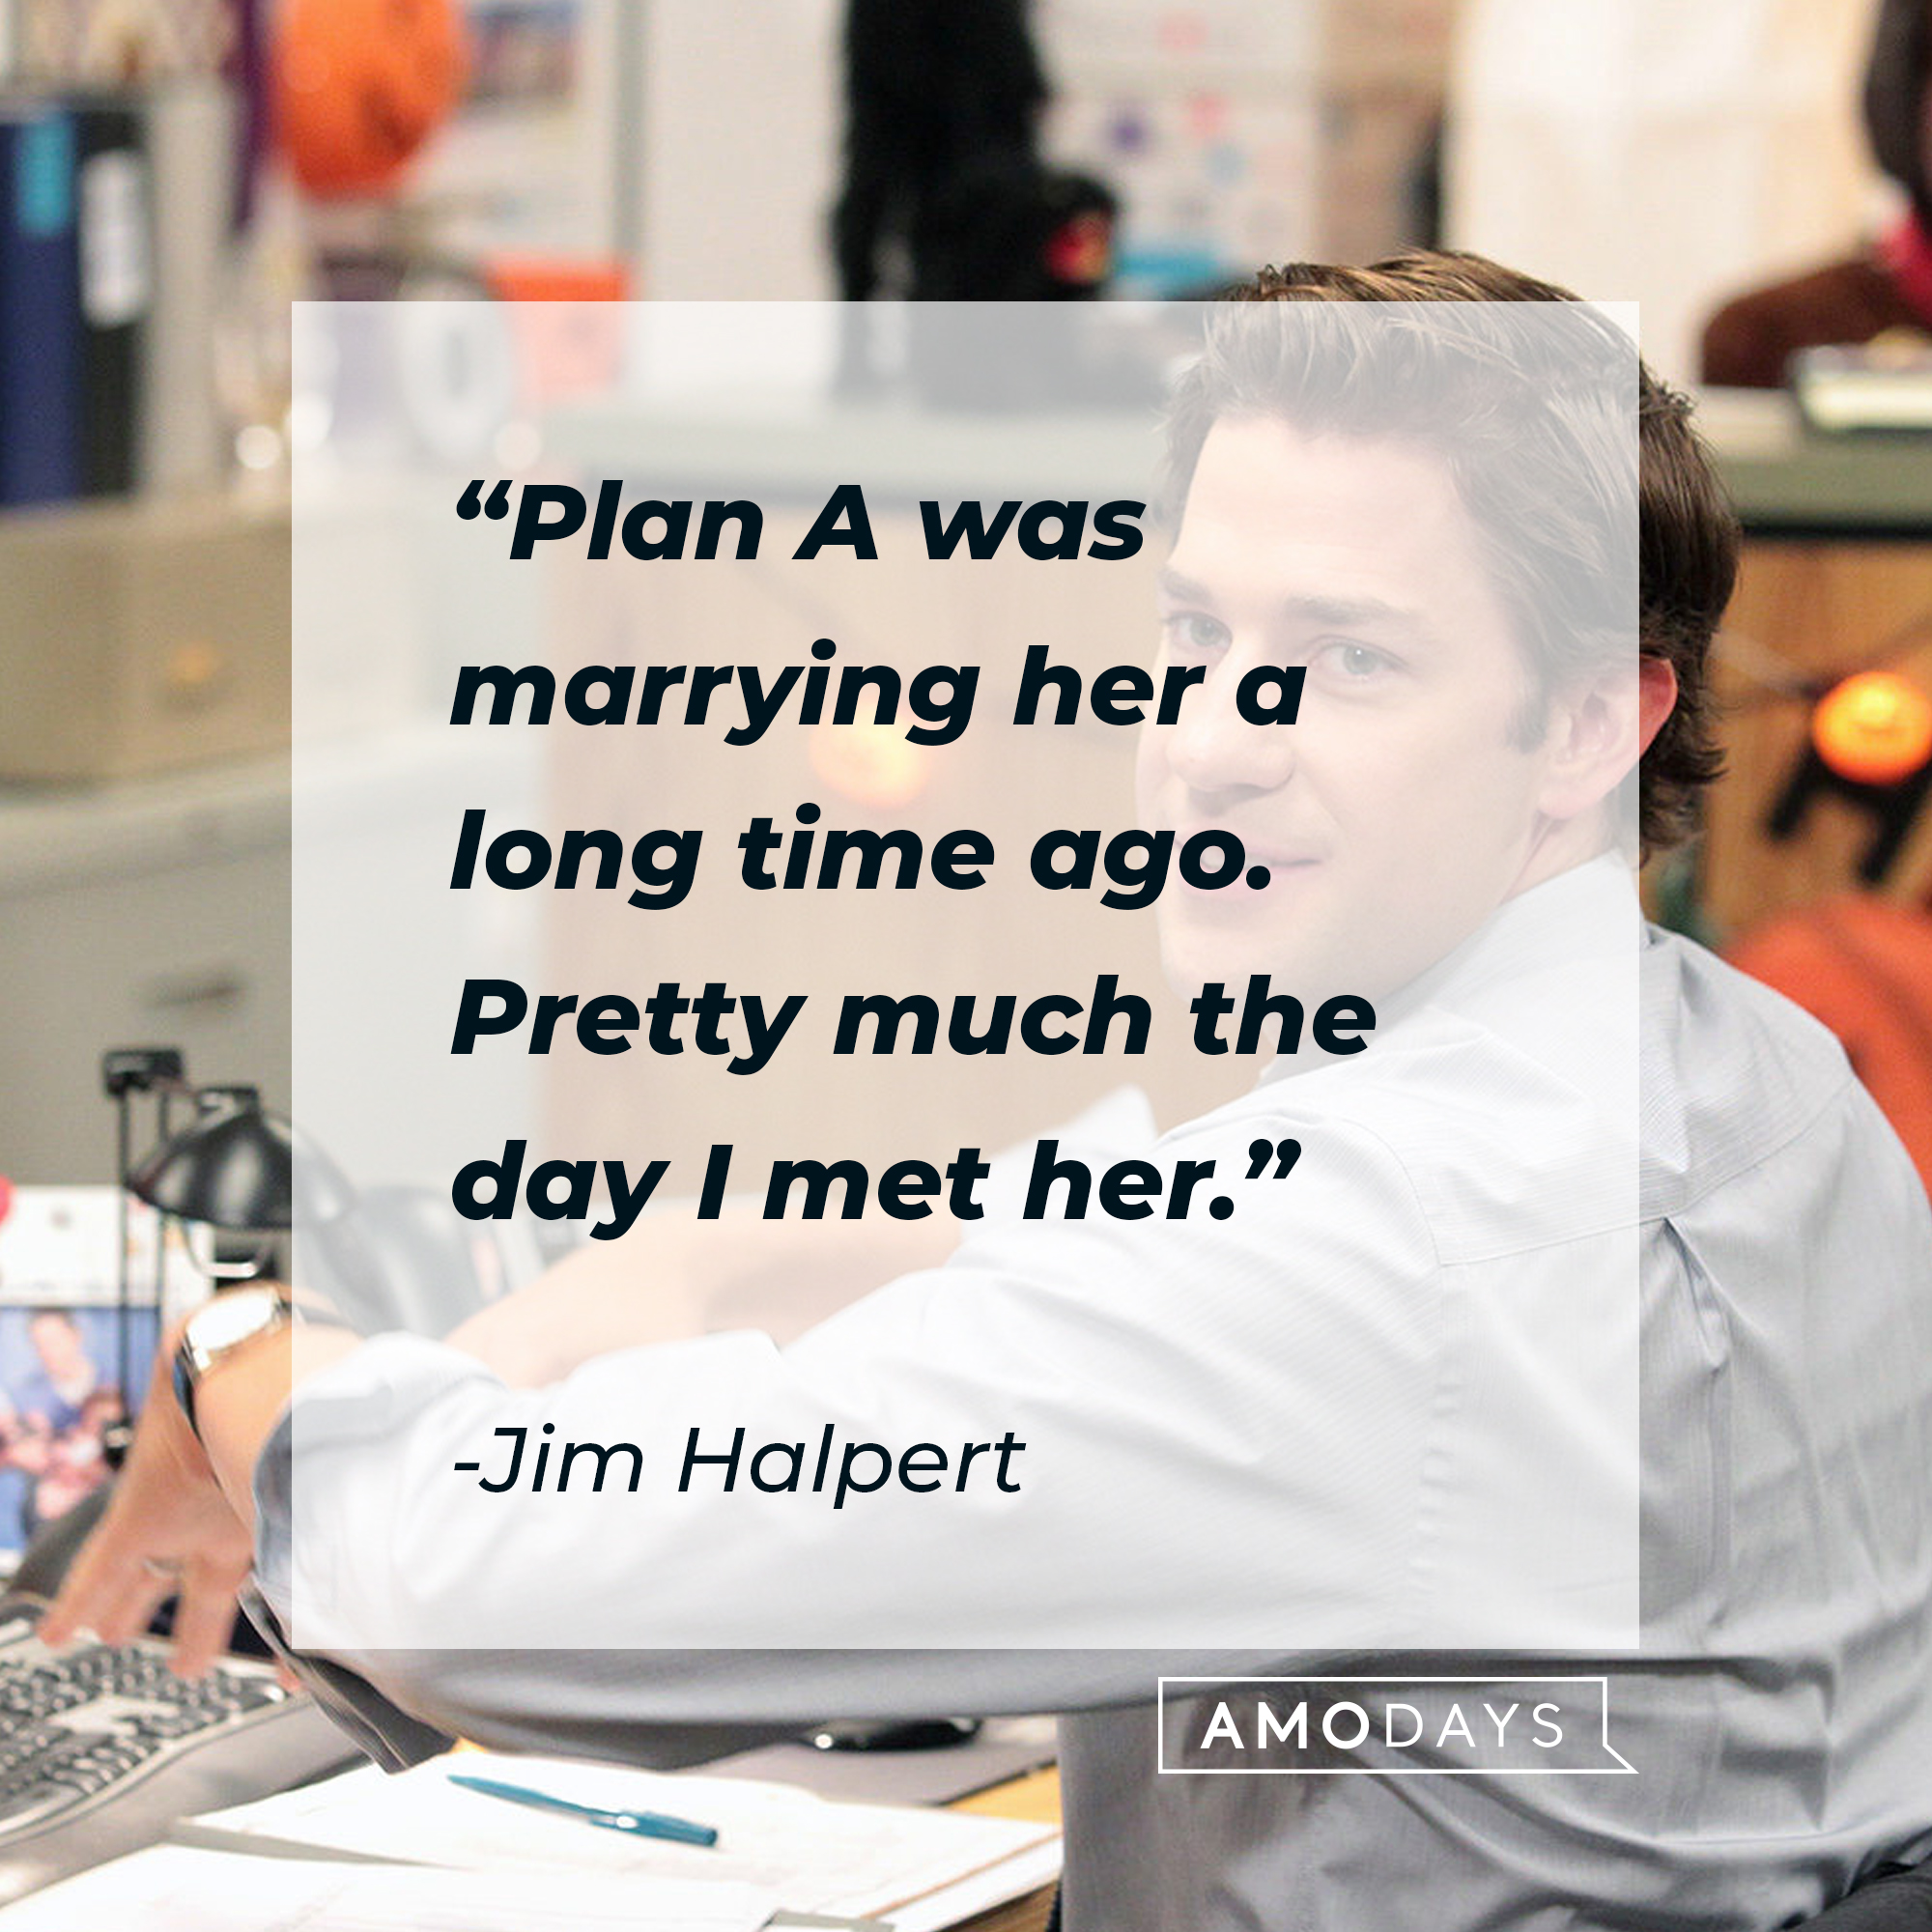 Jim with his quote, "Plan A was marrying her a long time ago. Pretty much the day I met her." | Source: Facebook/TheOfficeTV